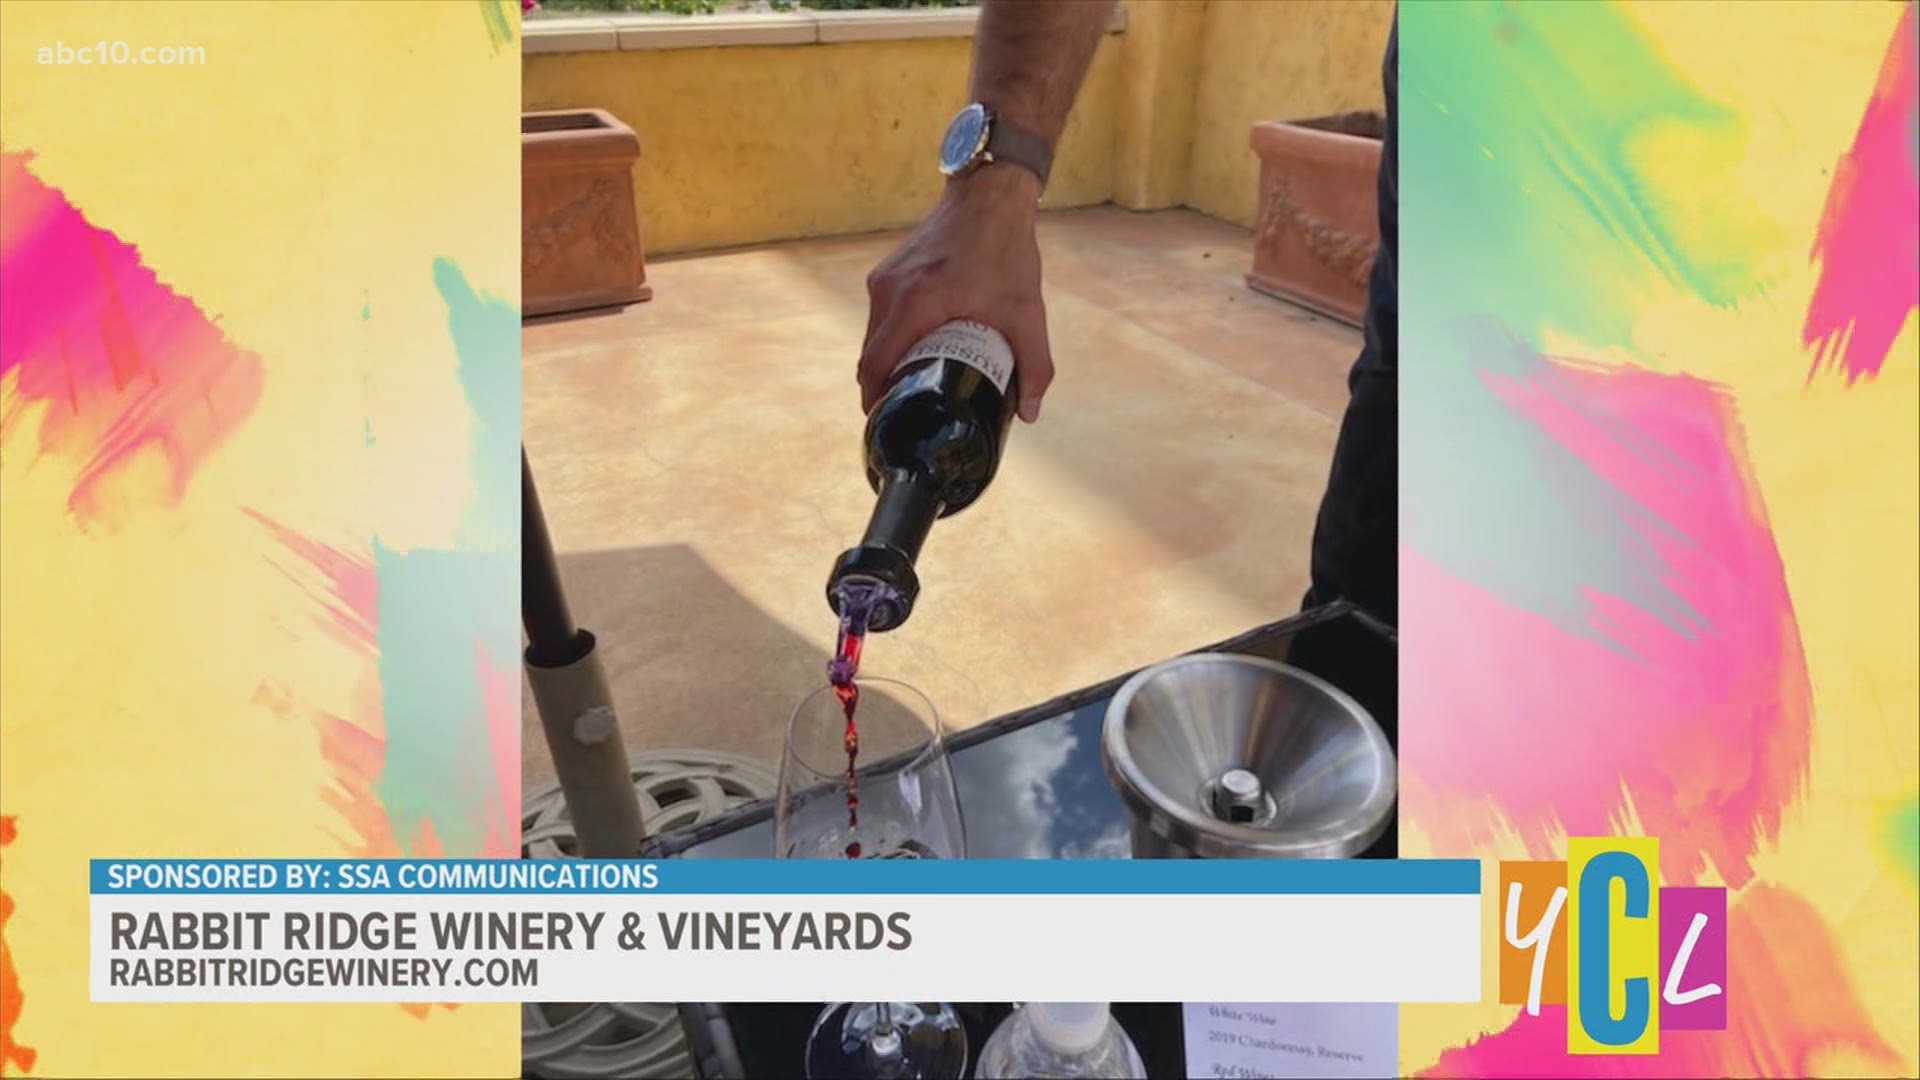 If you’re looking to ‘wine’ down, we’ll meet with the masterminds behind Rabbit Ridge Winery. 
This segment paid for by SSA Communications.